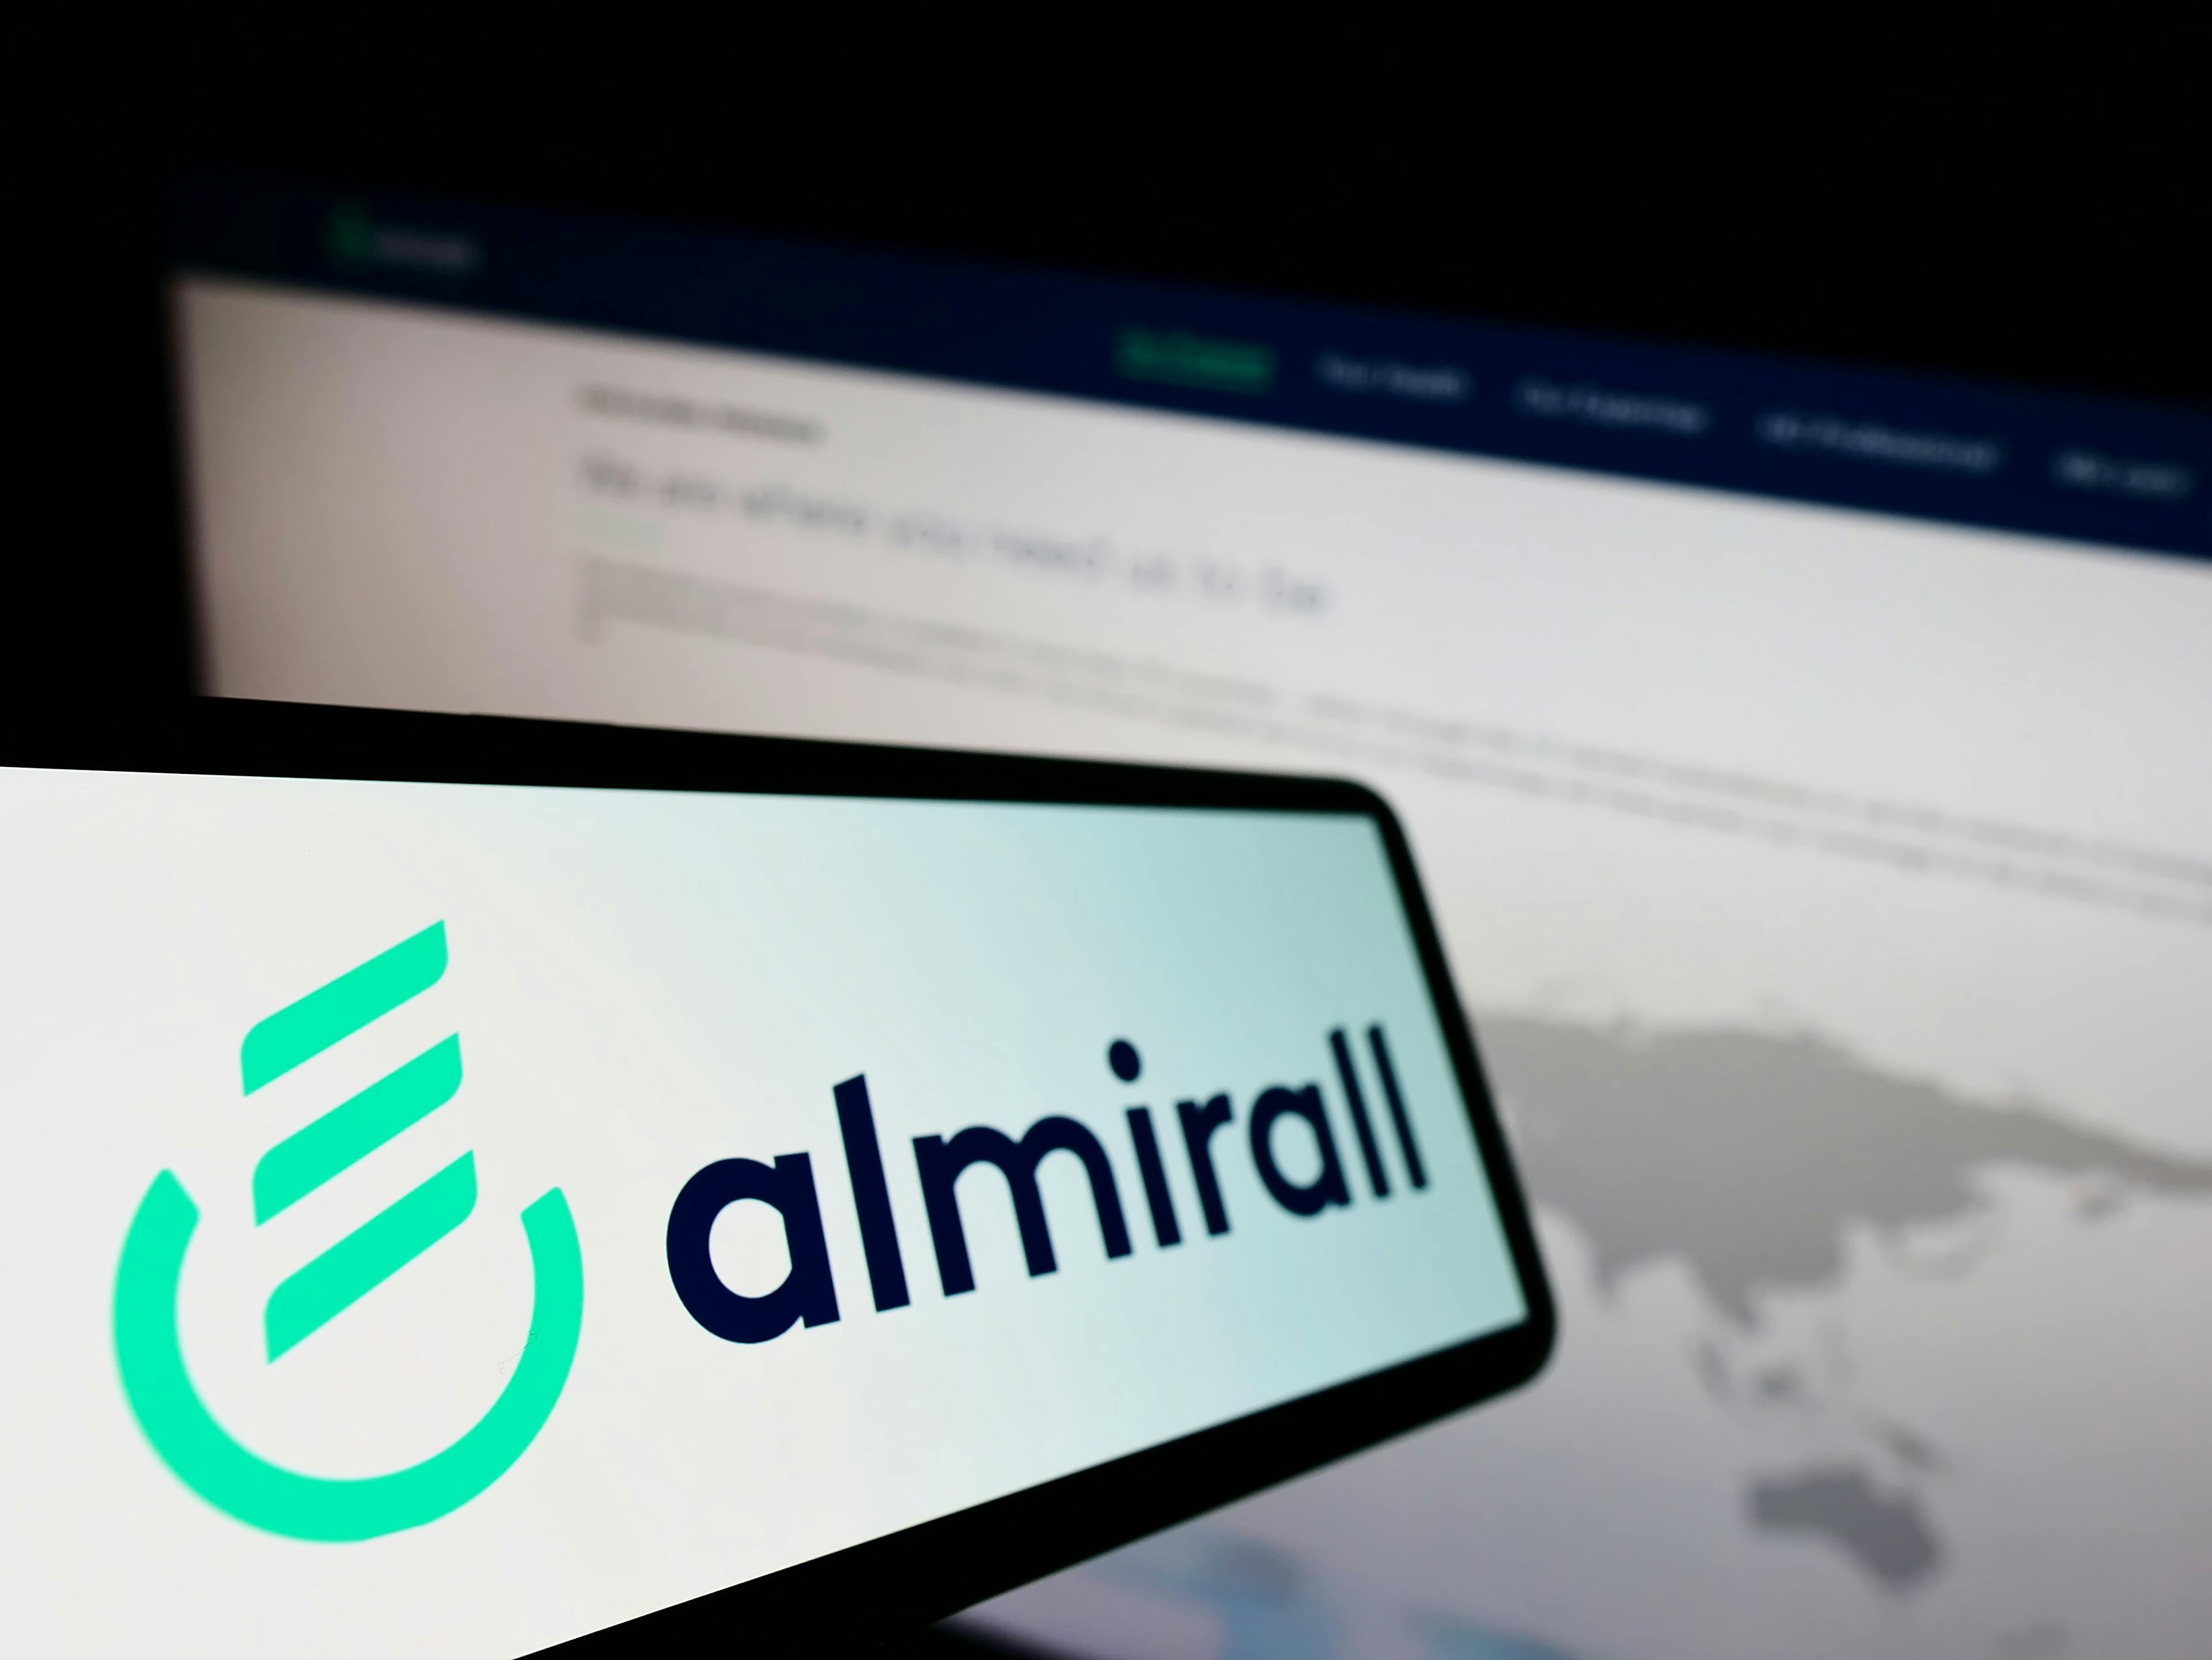 Almirall Announces Partnership With Microsoft for Digital Transformation, Development of Skin Disease Treatments